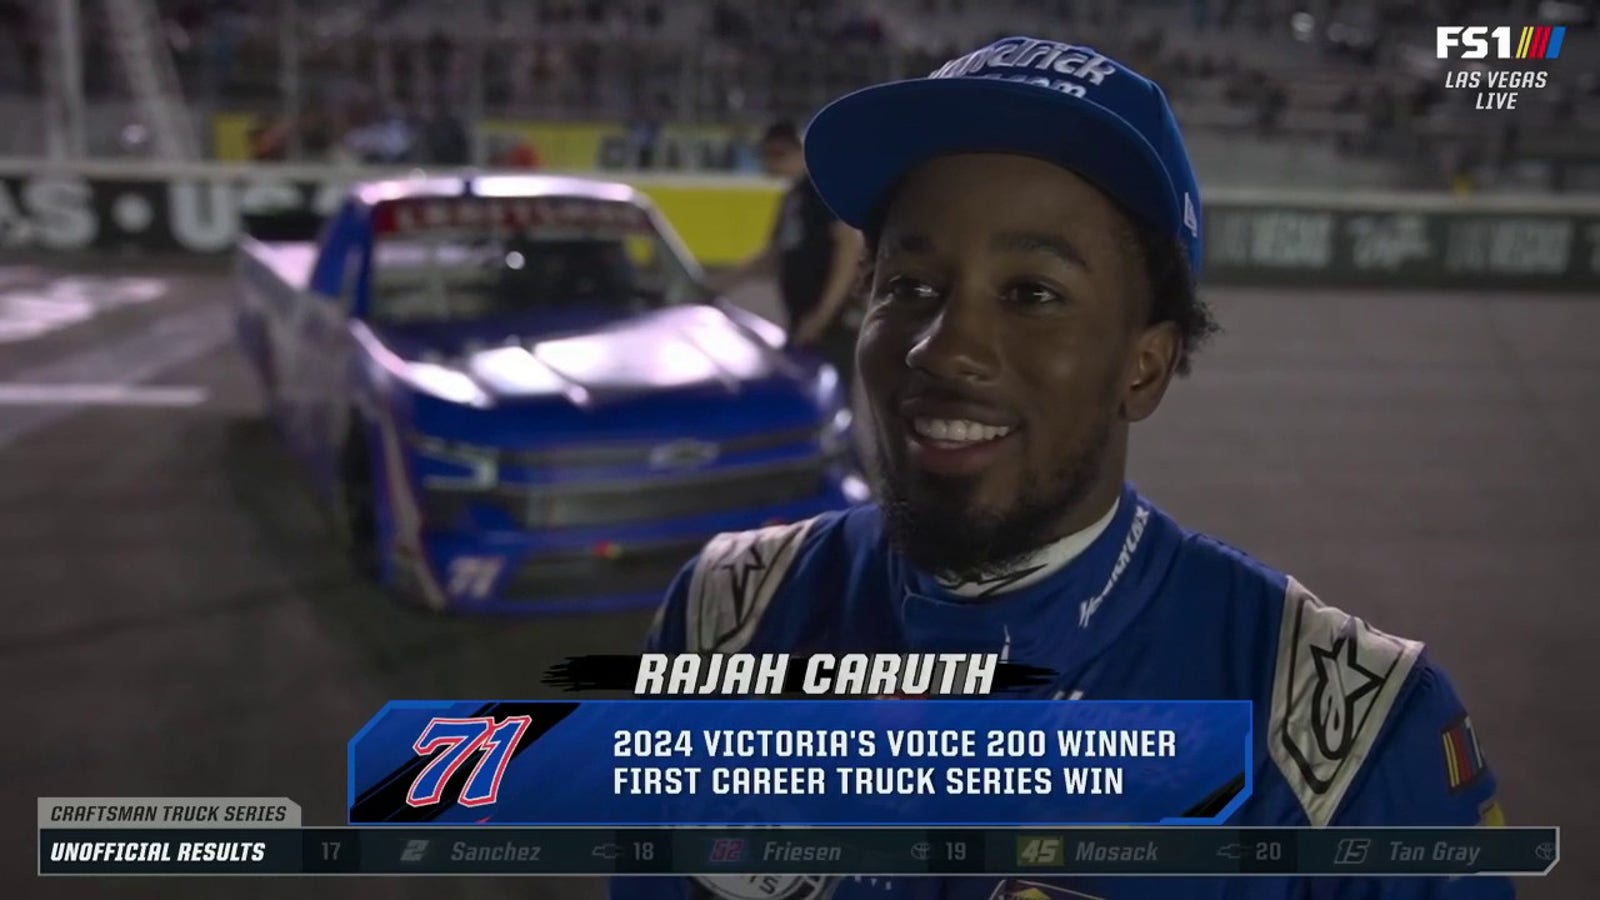 'There's more to come' — Rajah Caruth on winning his first career truck series 